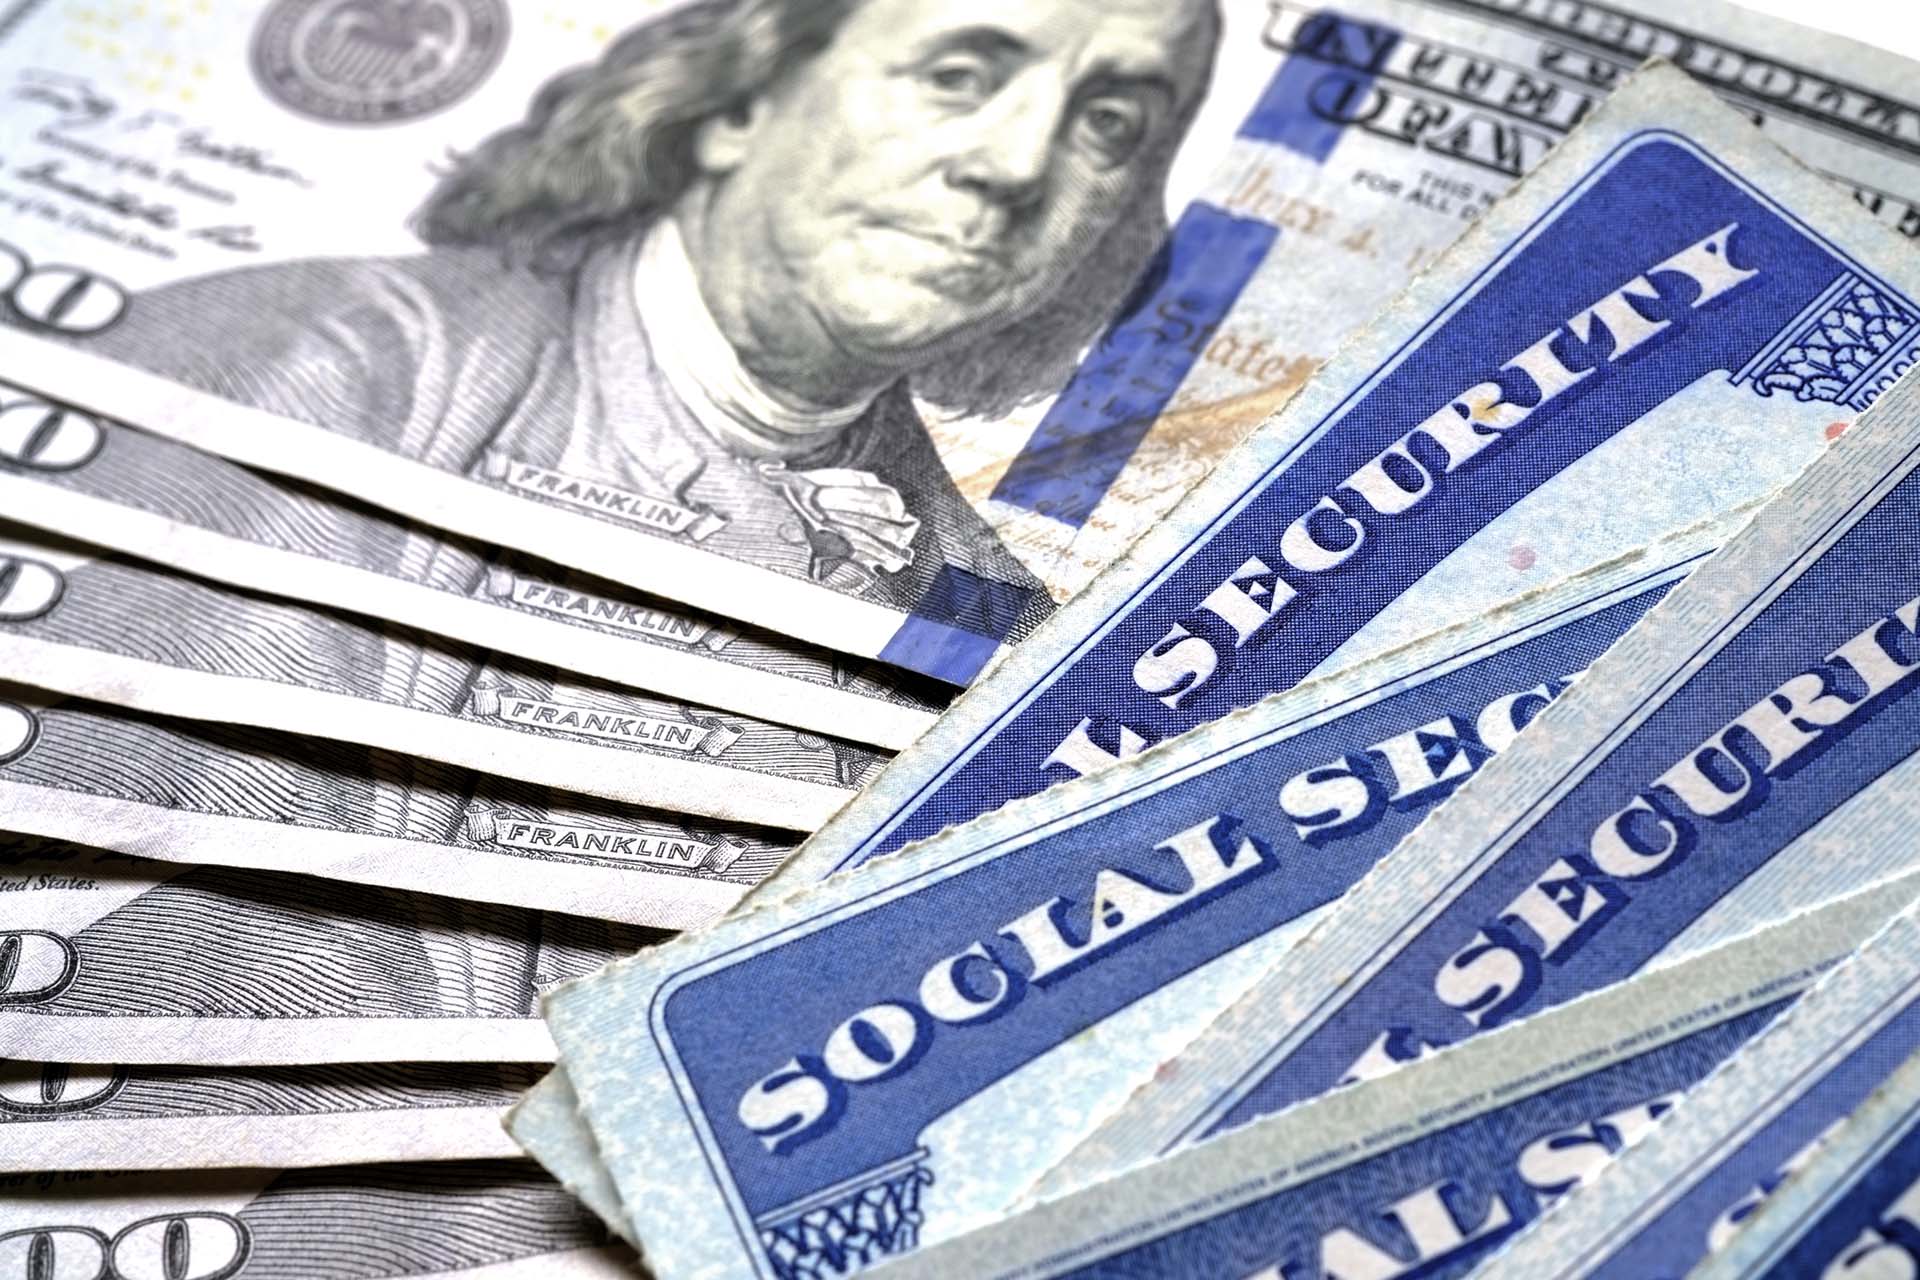 MLT Attorneys are well verse in Social Security and Disability Law